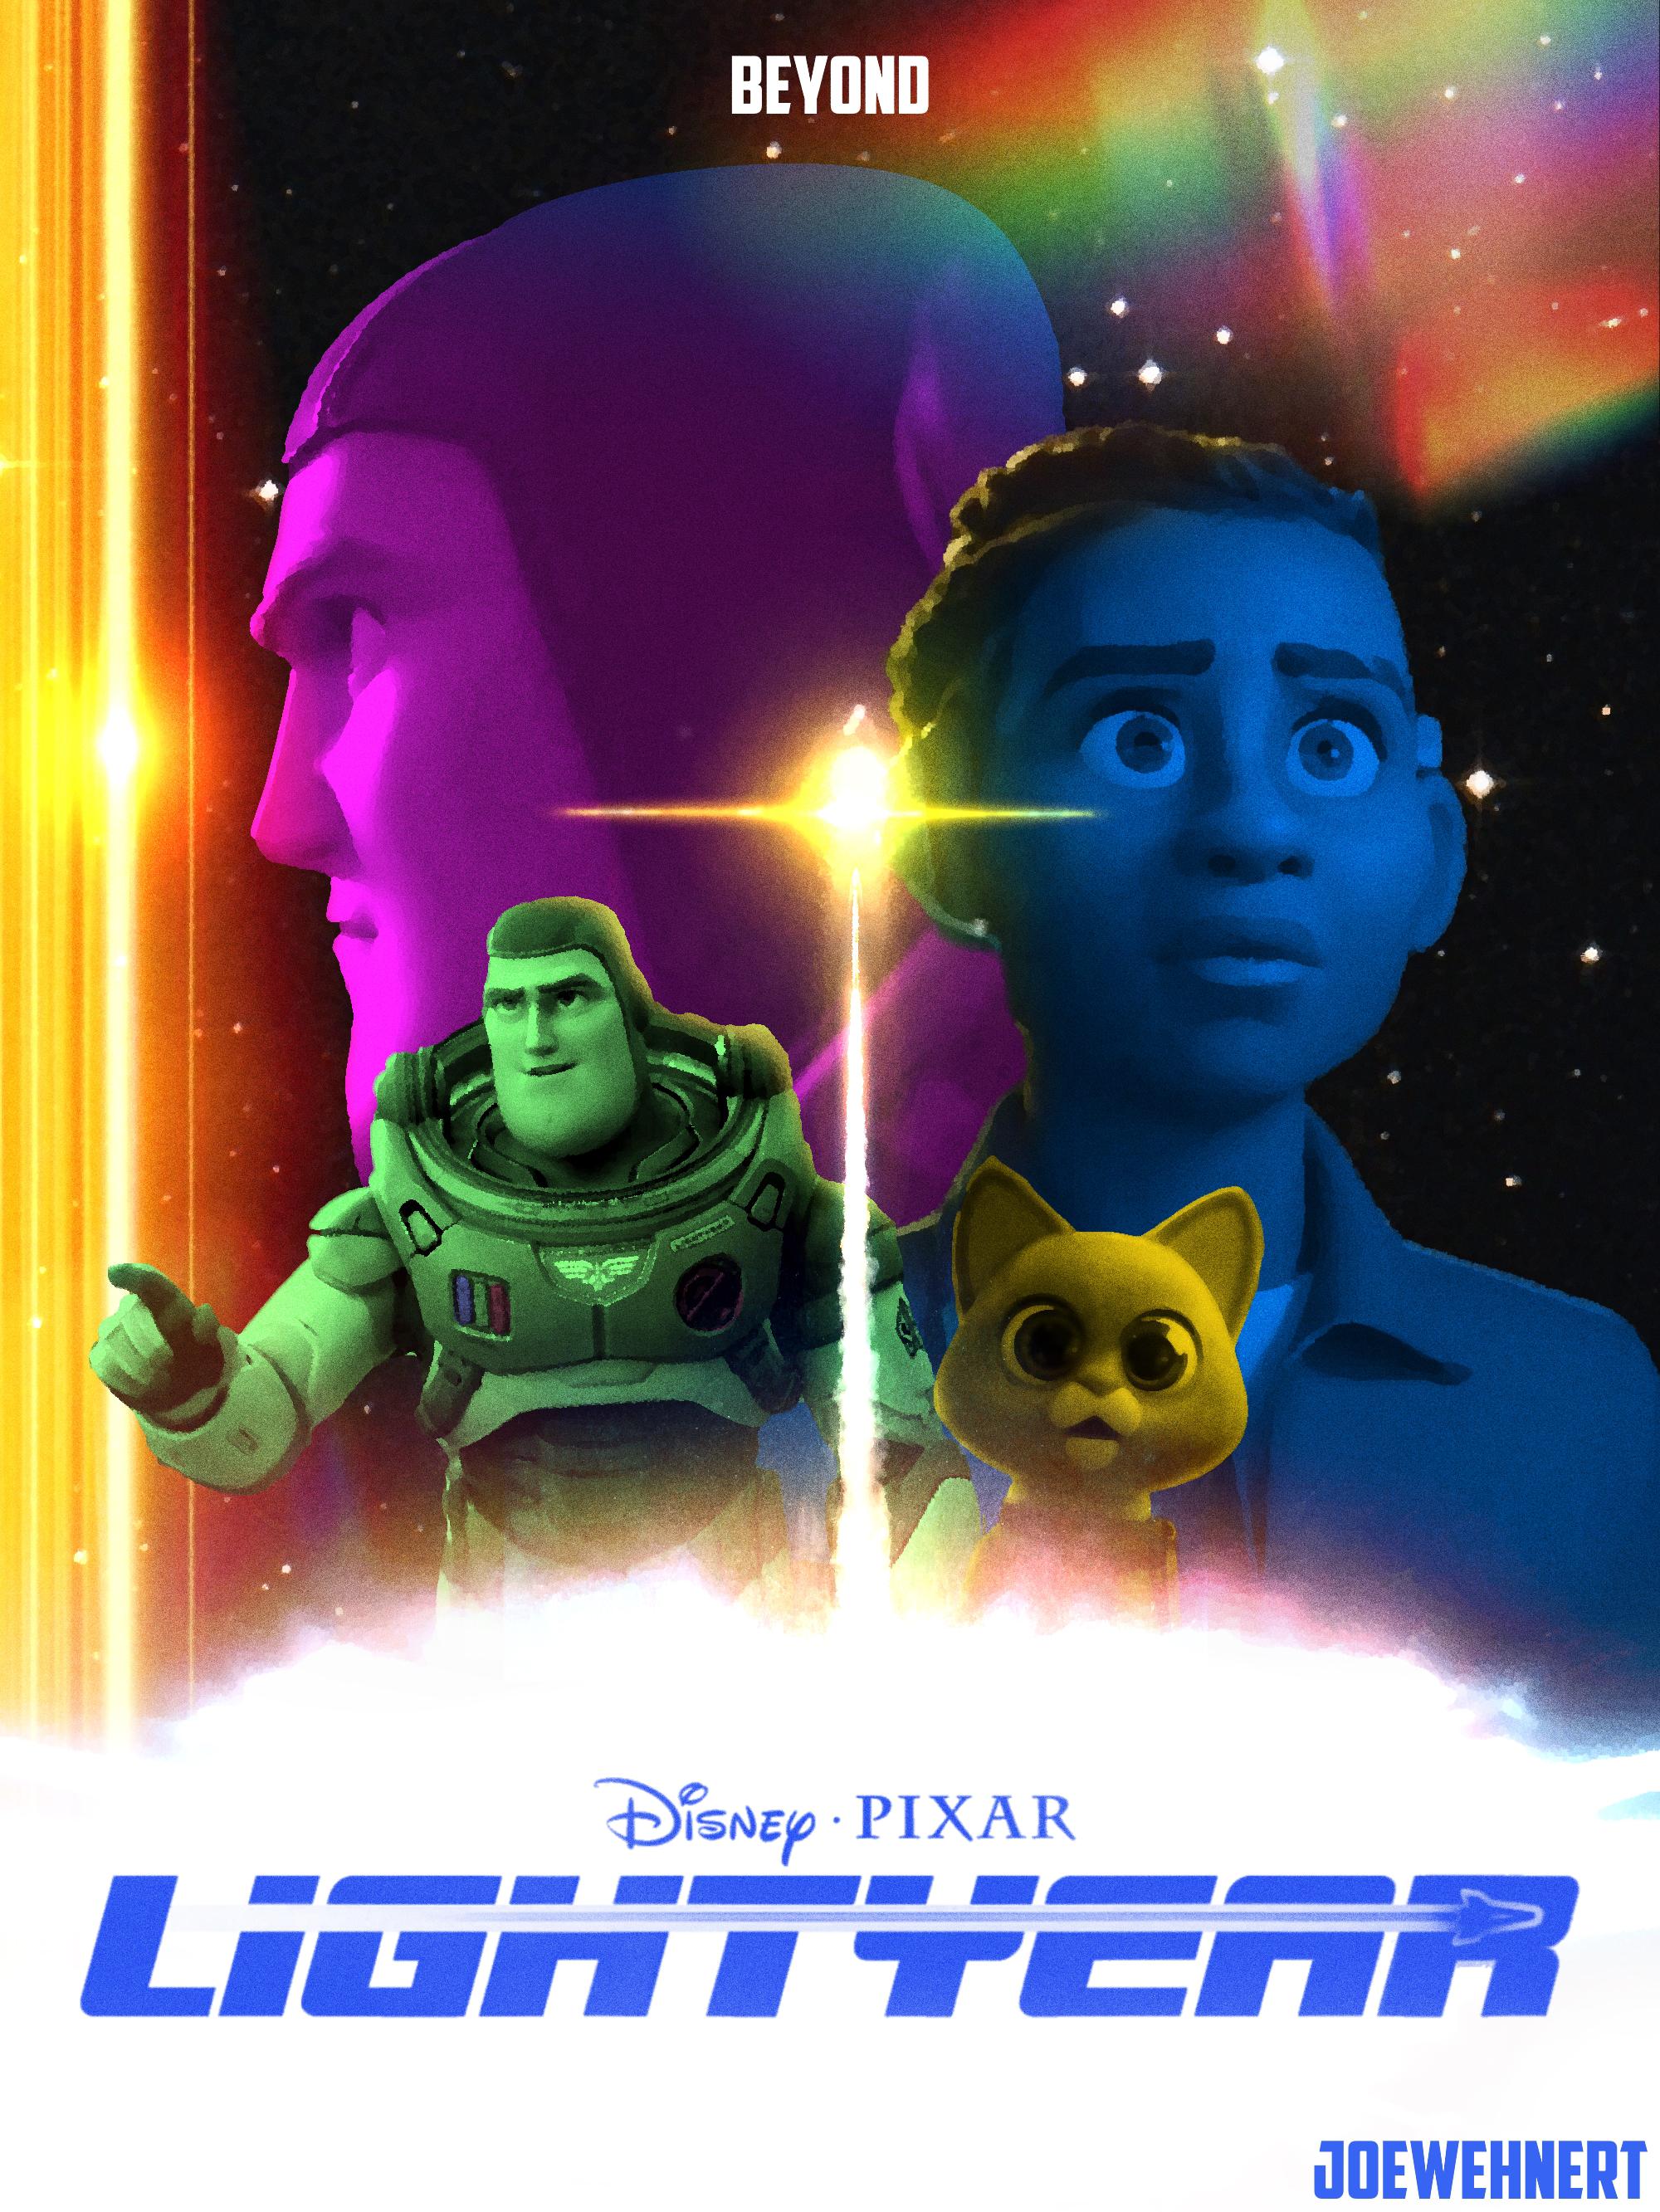 Fan Poster I did for LIGHTYEAR. Very excited! Loved the trailer! : r/Pixar